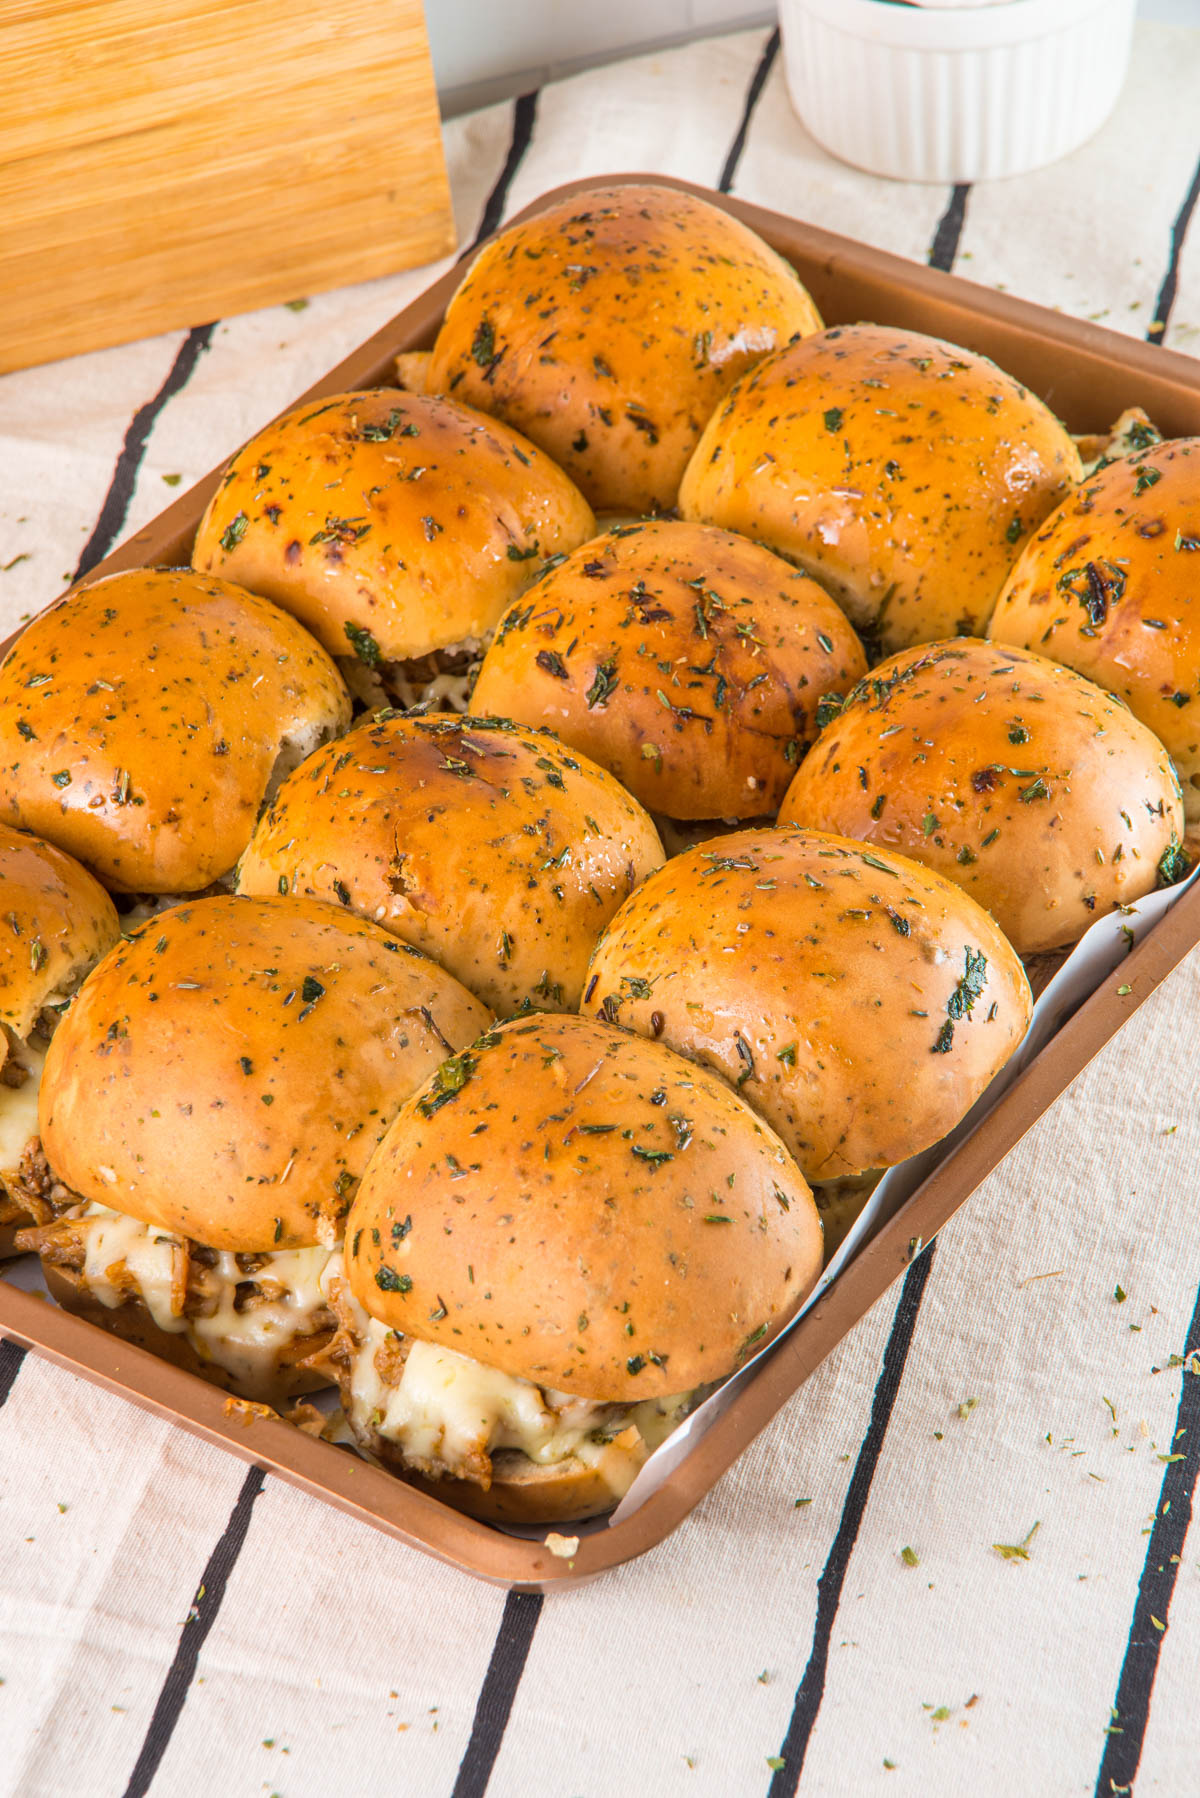 A pan filled with pork sliders